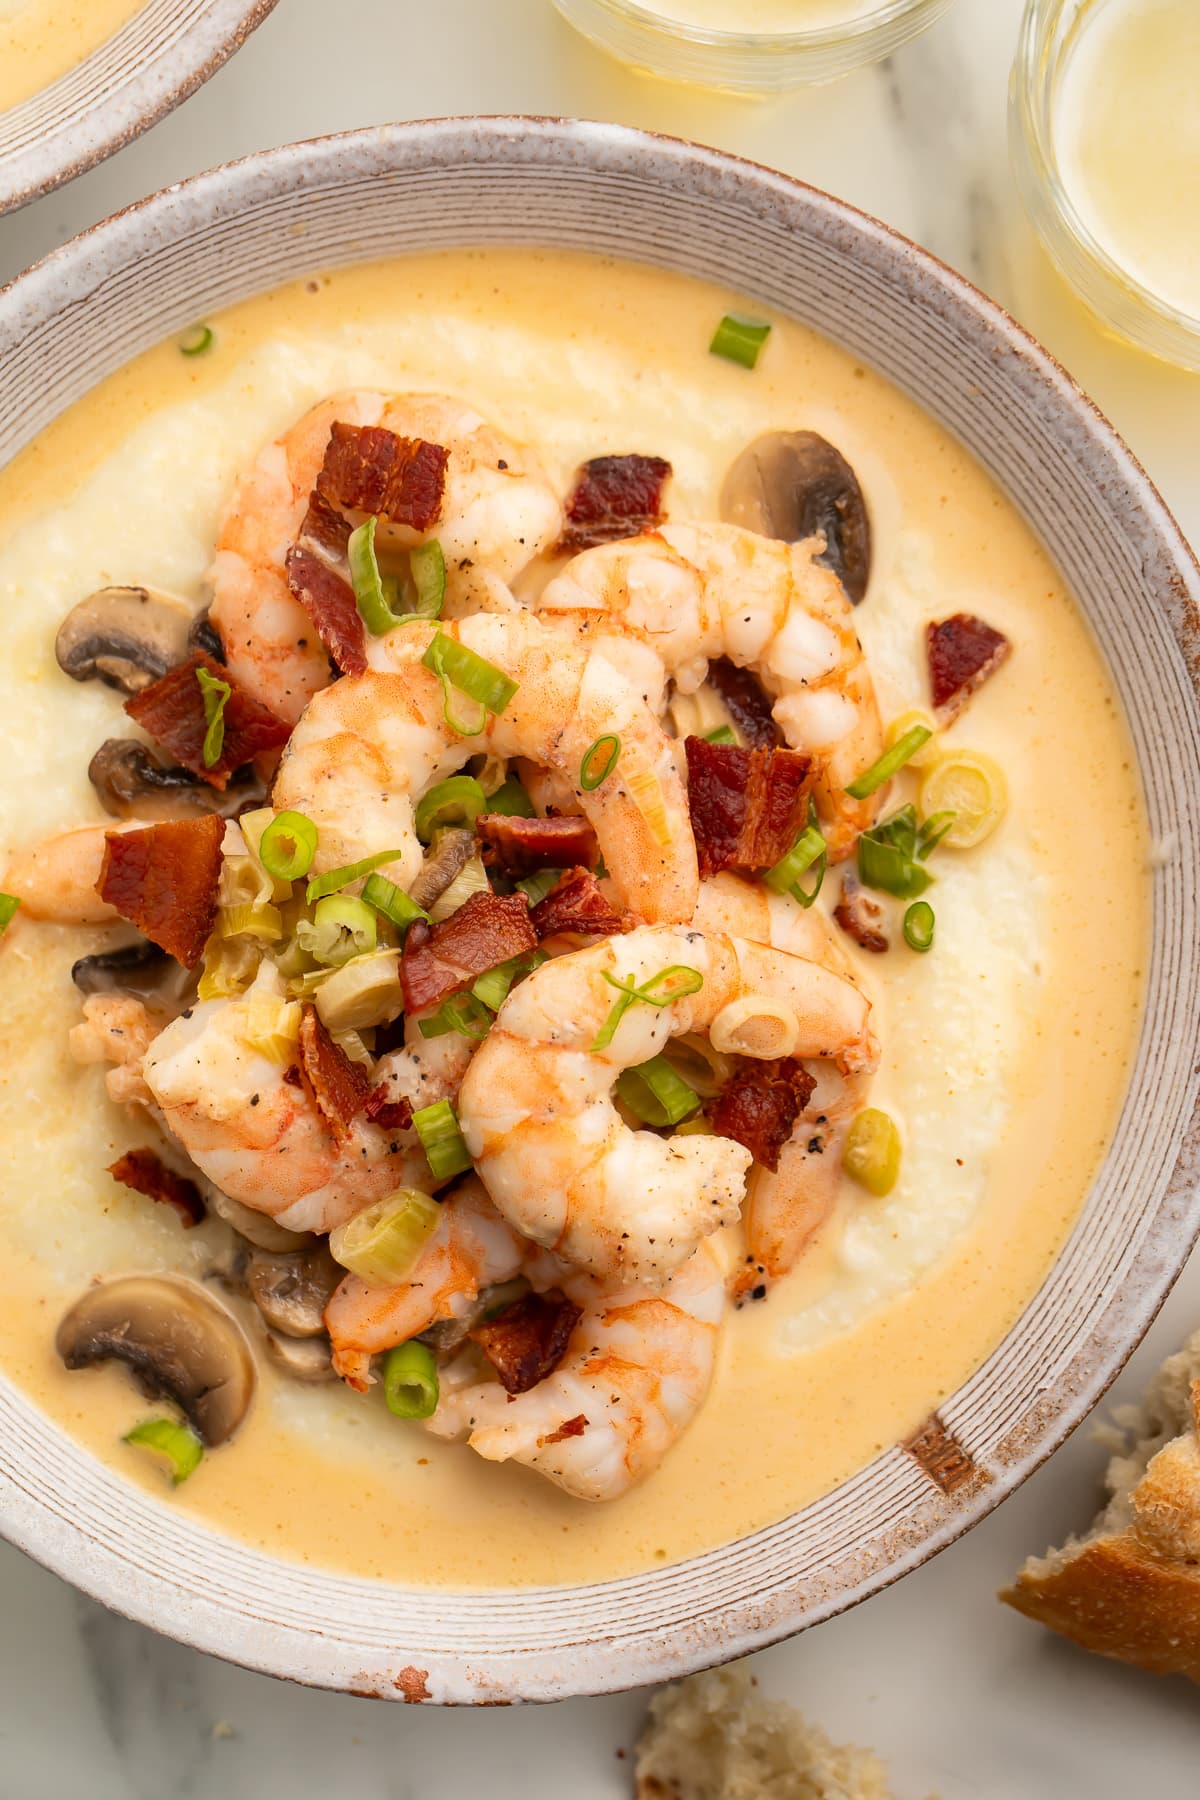 Overhead view of a large white bowl holding creamy grits topped with pink shrimp, bacon, and mushrooms.